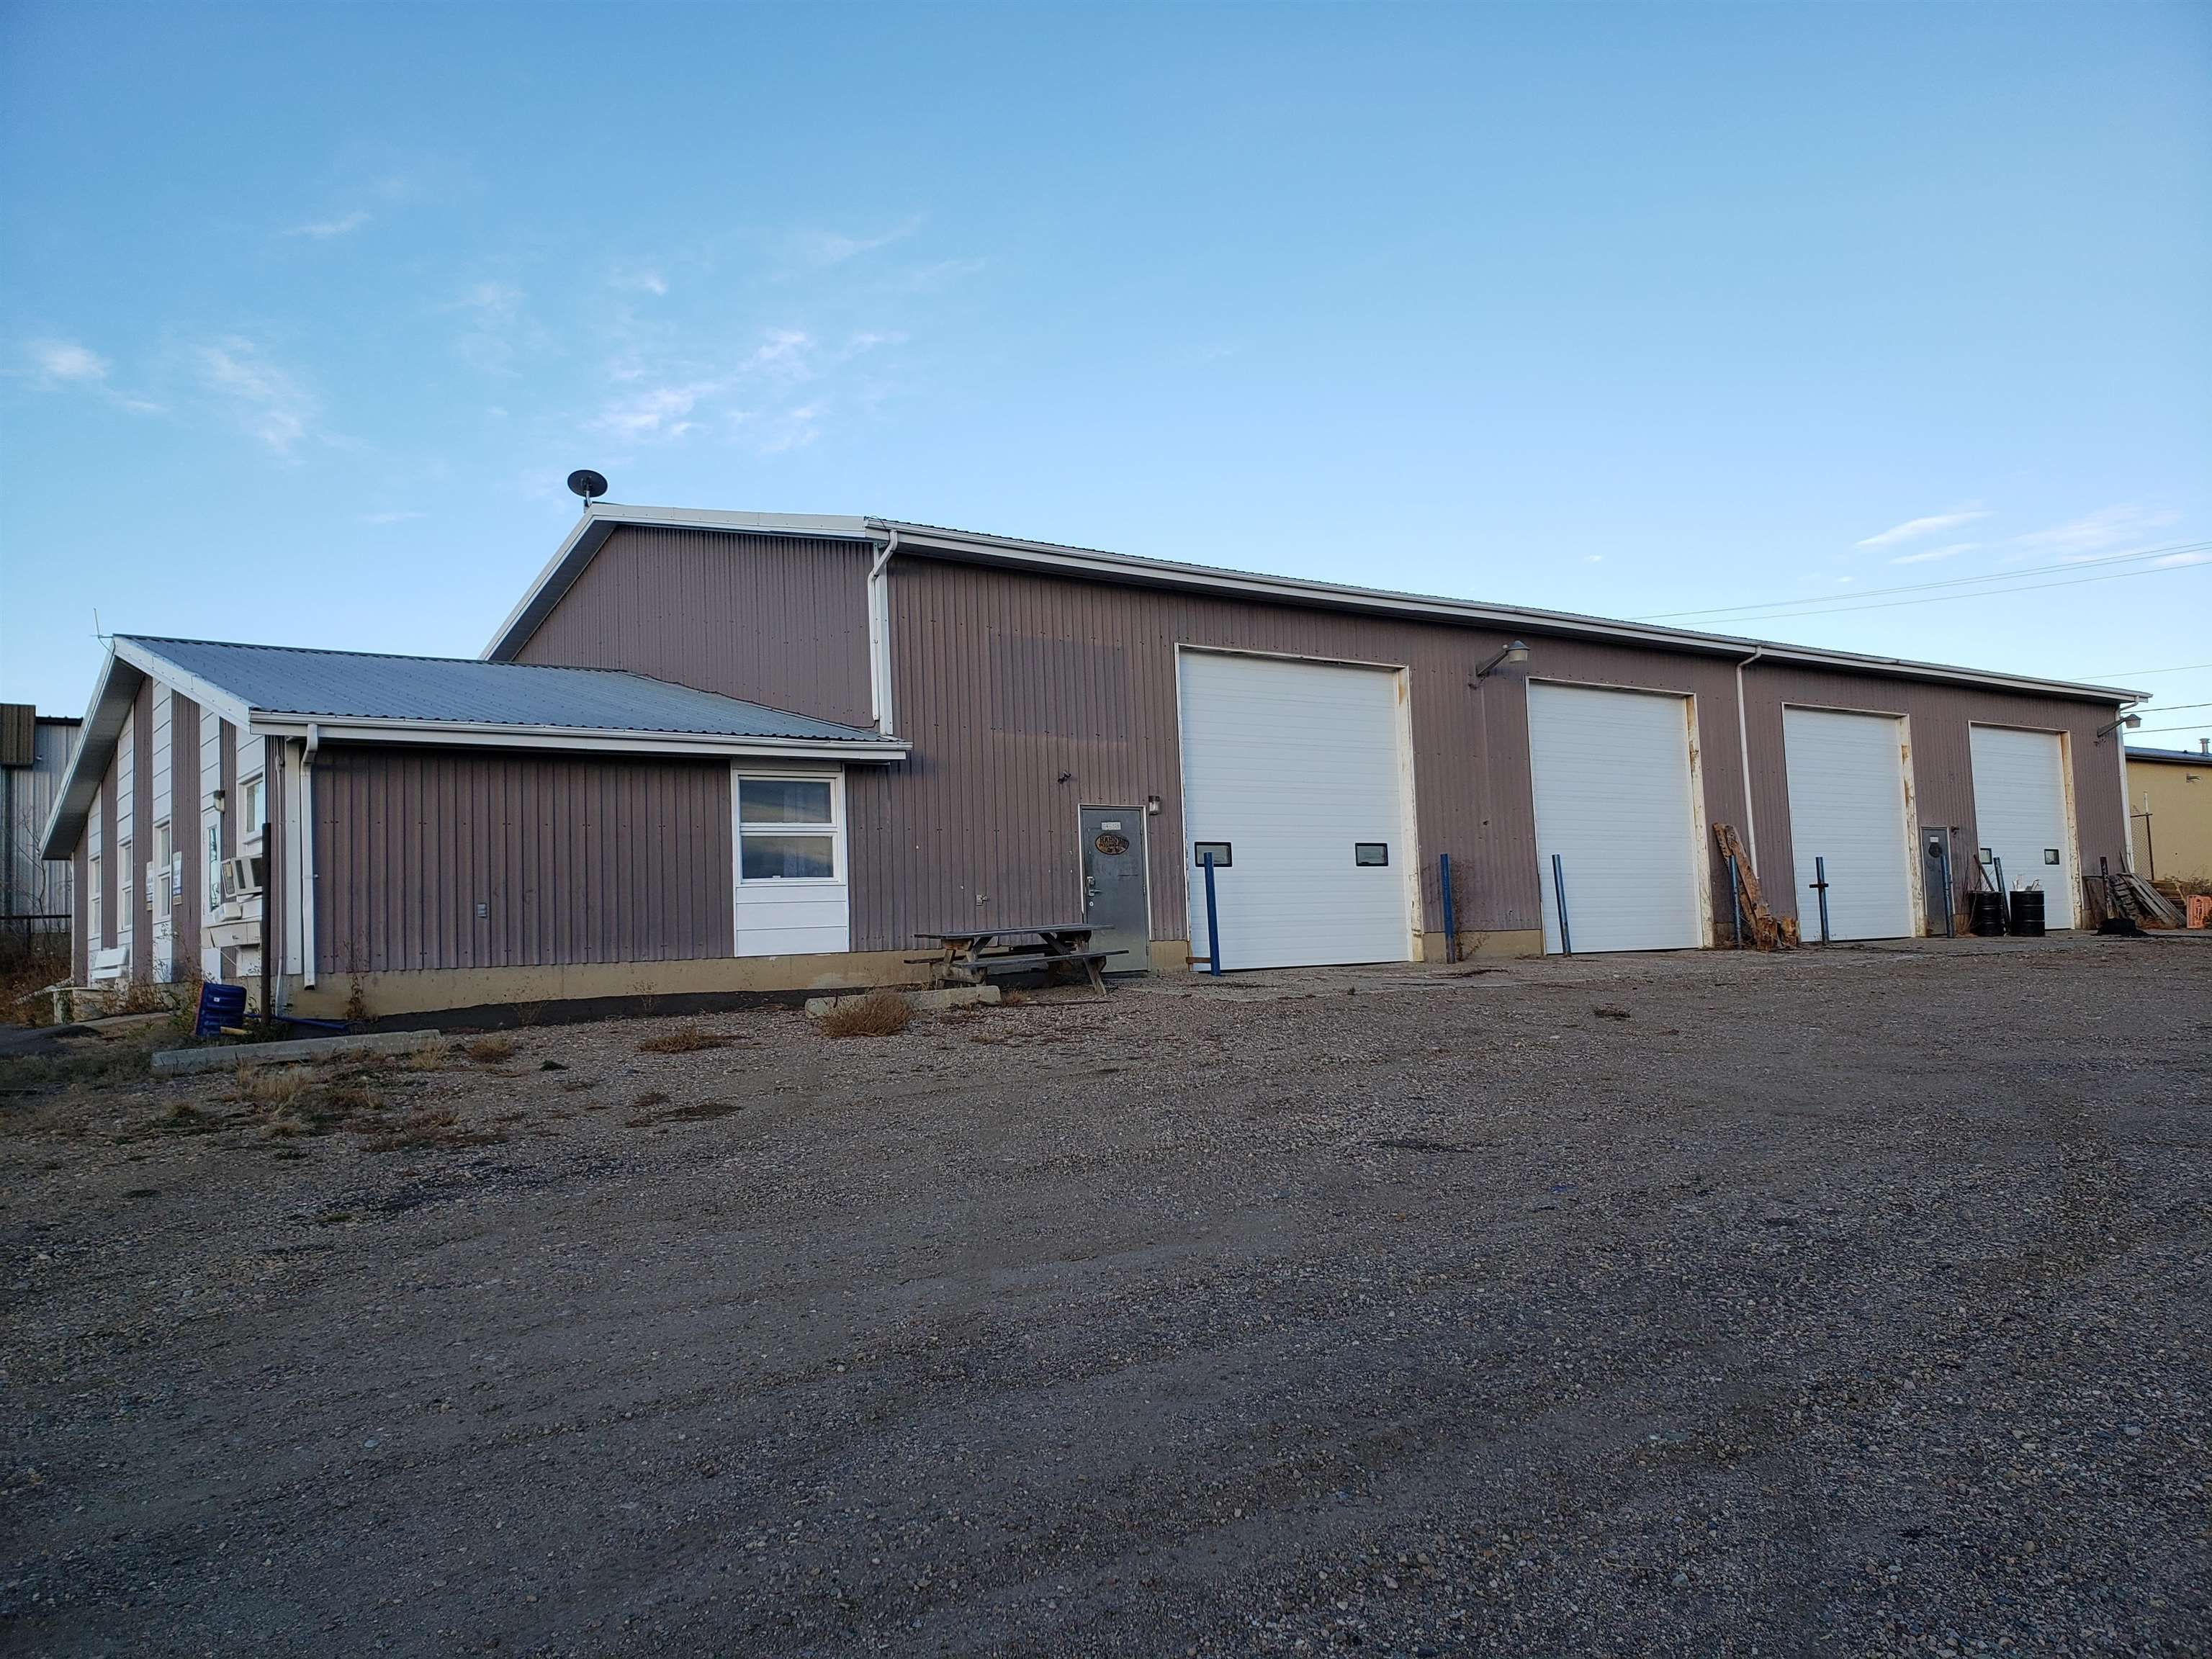 Main Photo: 5205 47 Street: Elk Point Industrial for sale or lease : MLS®# E4241838